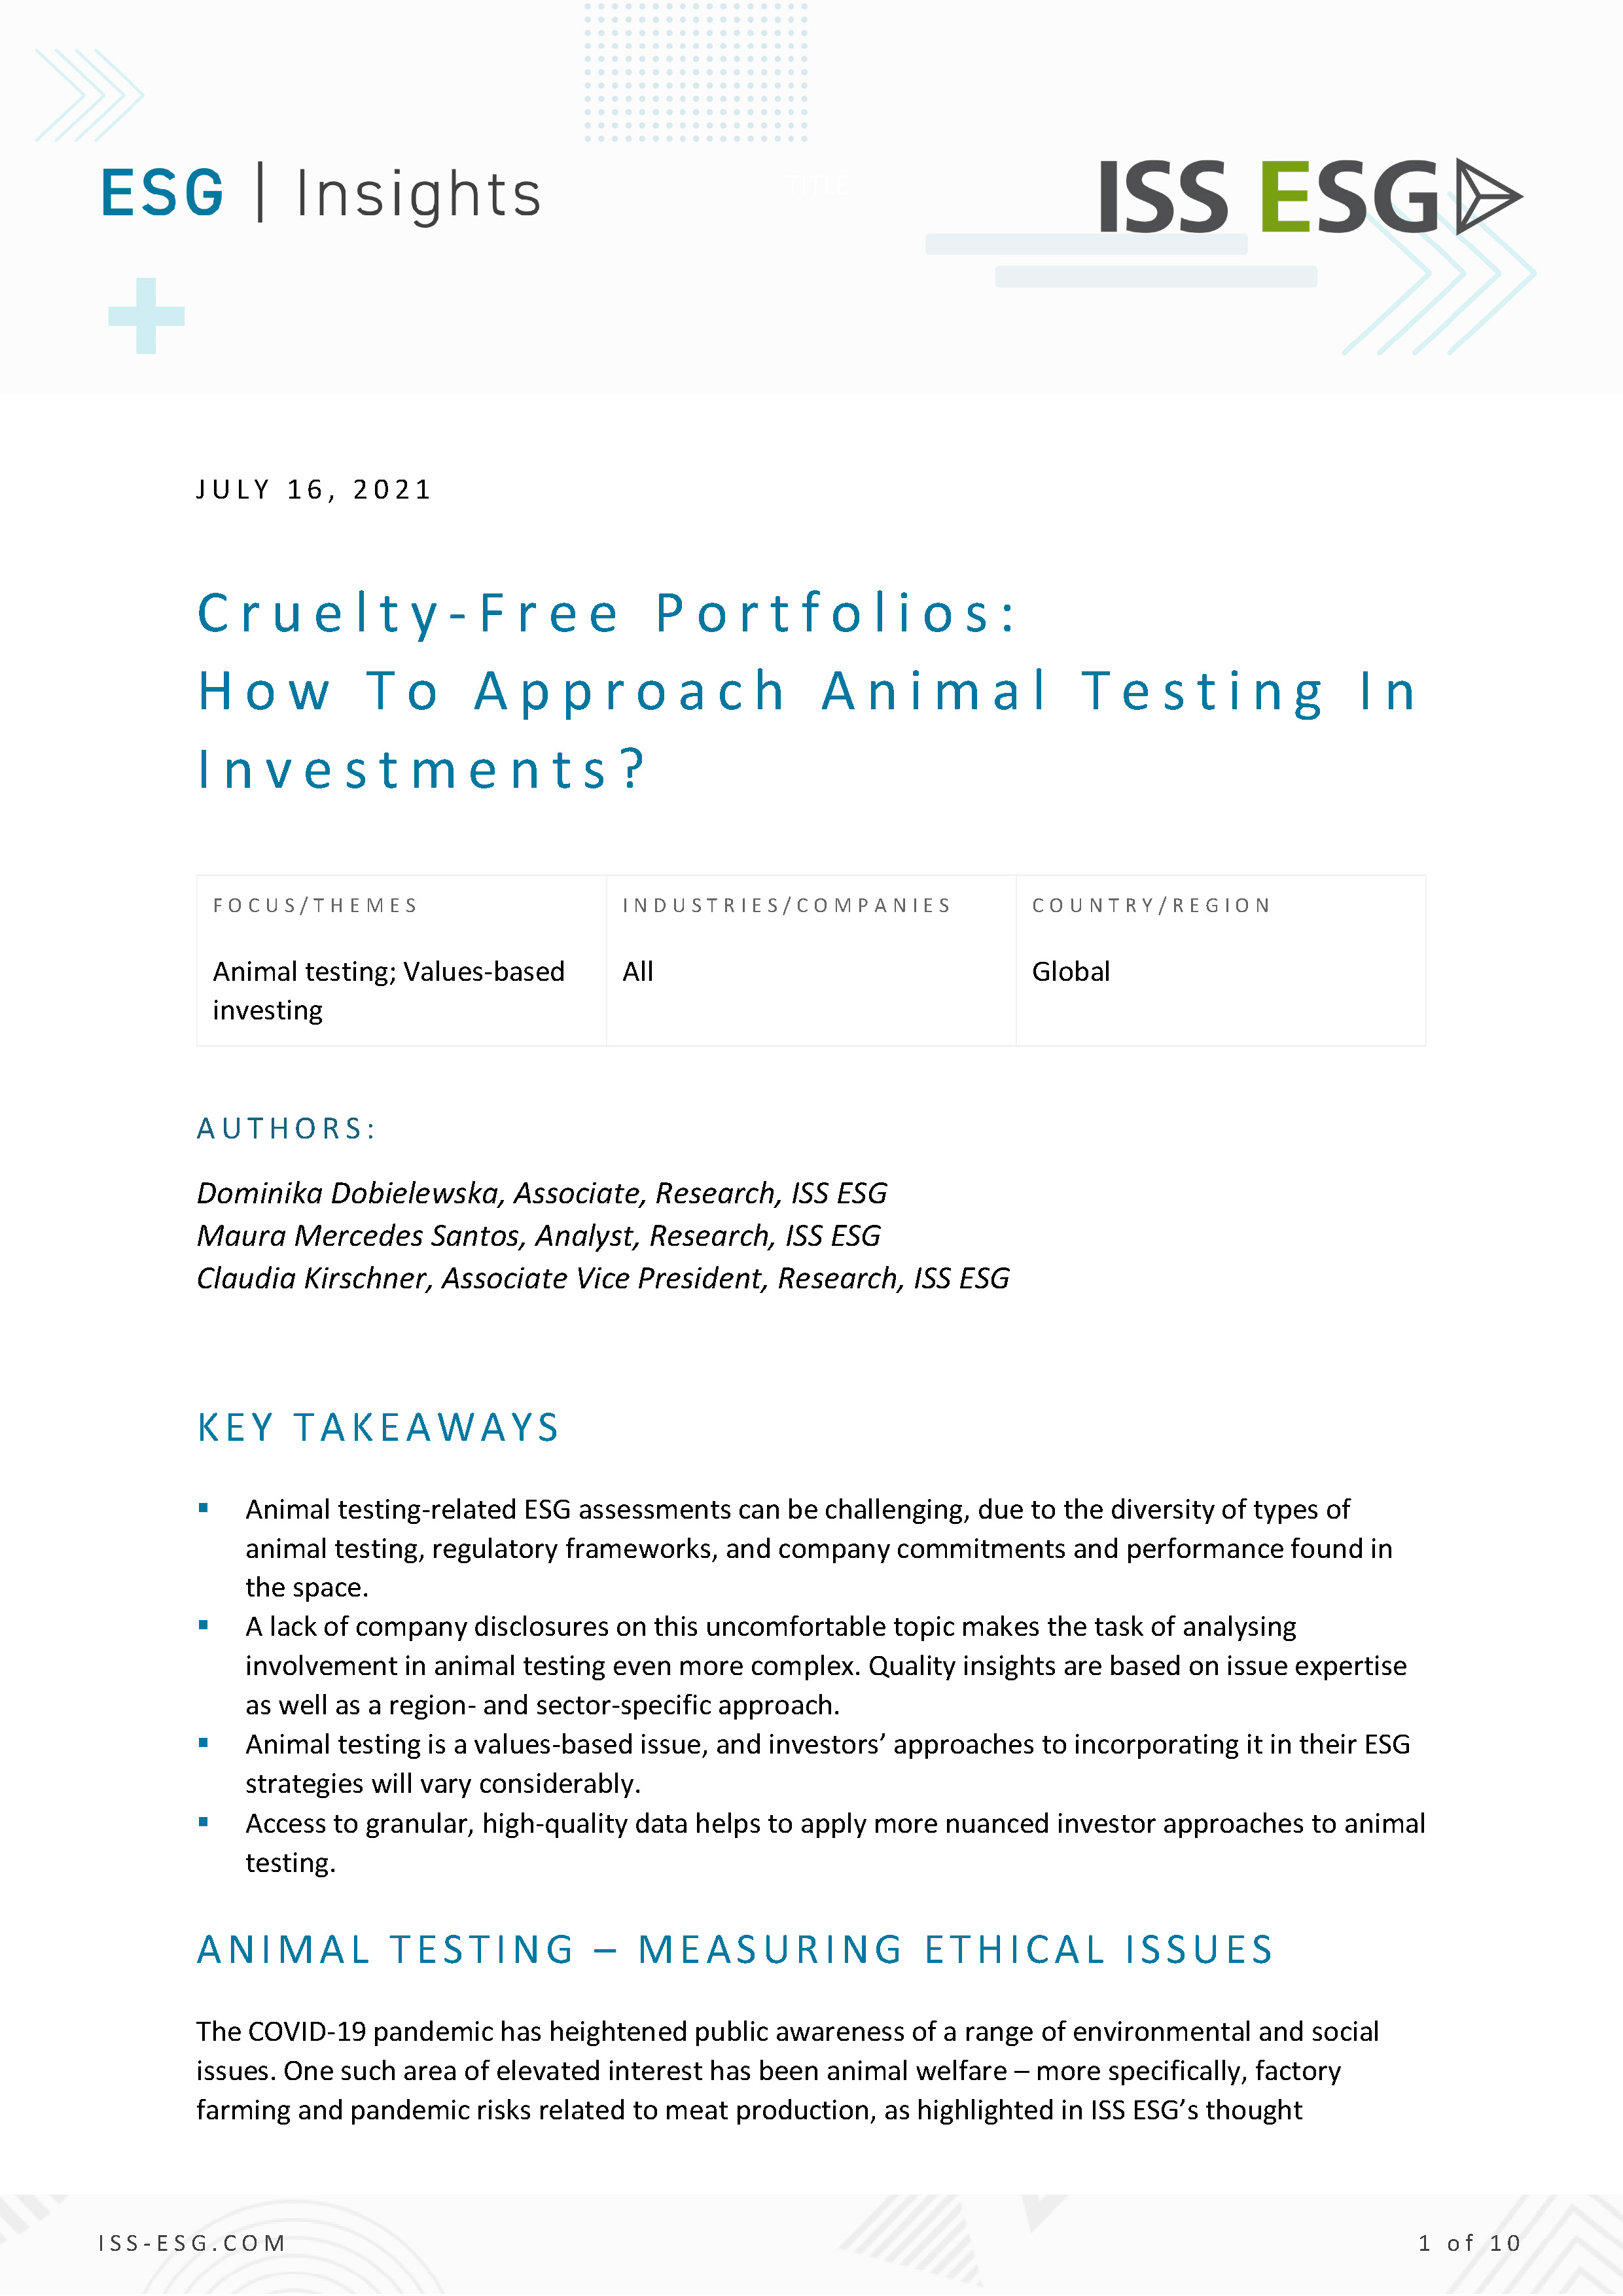 Cruelty-Free Portfolios: How To Approach Animal Testing In Investments? |  ISS